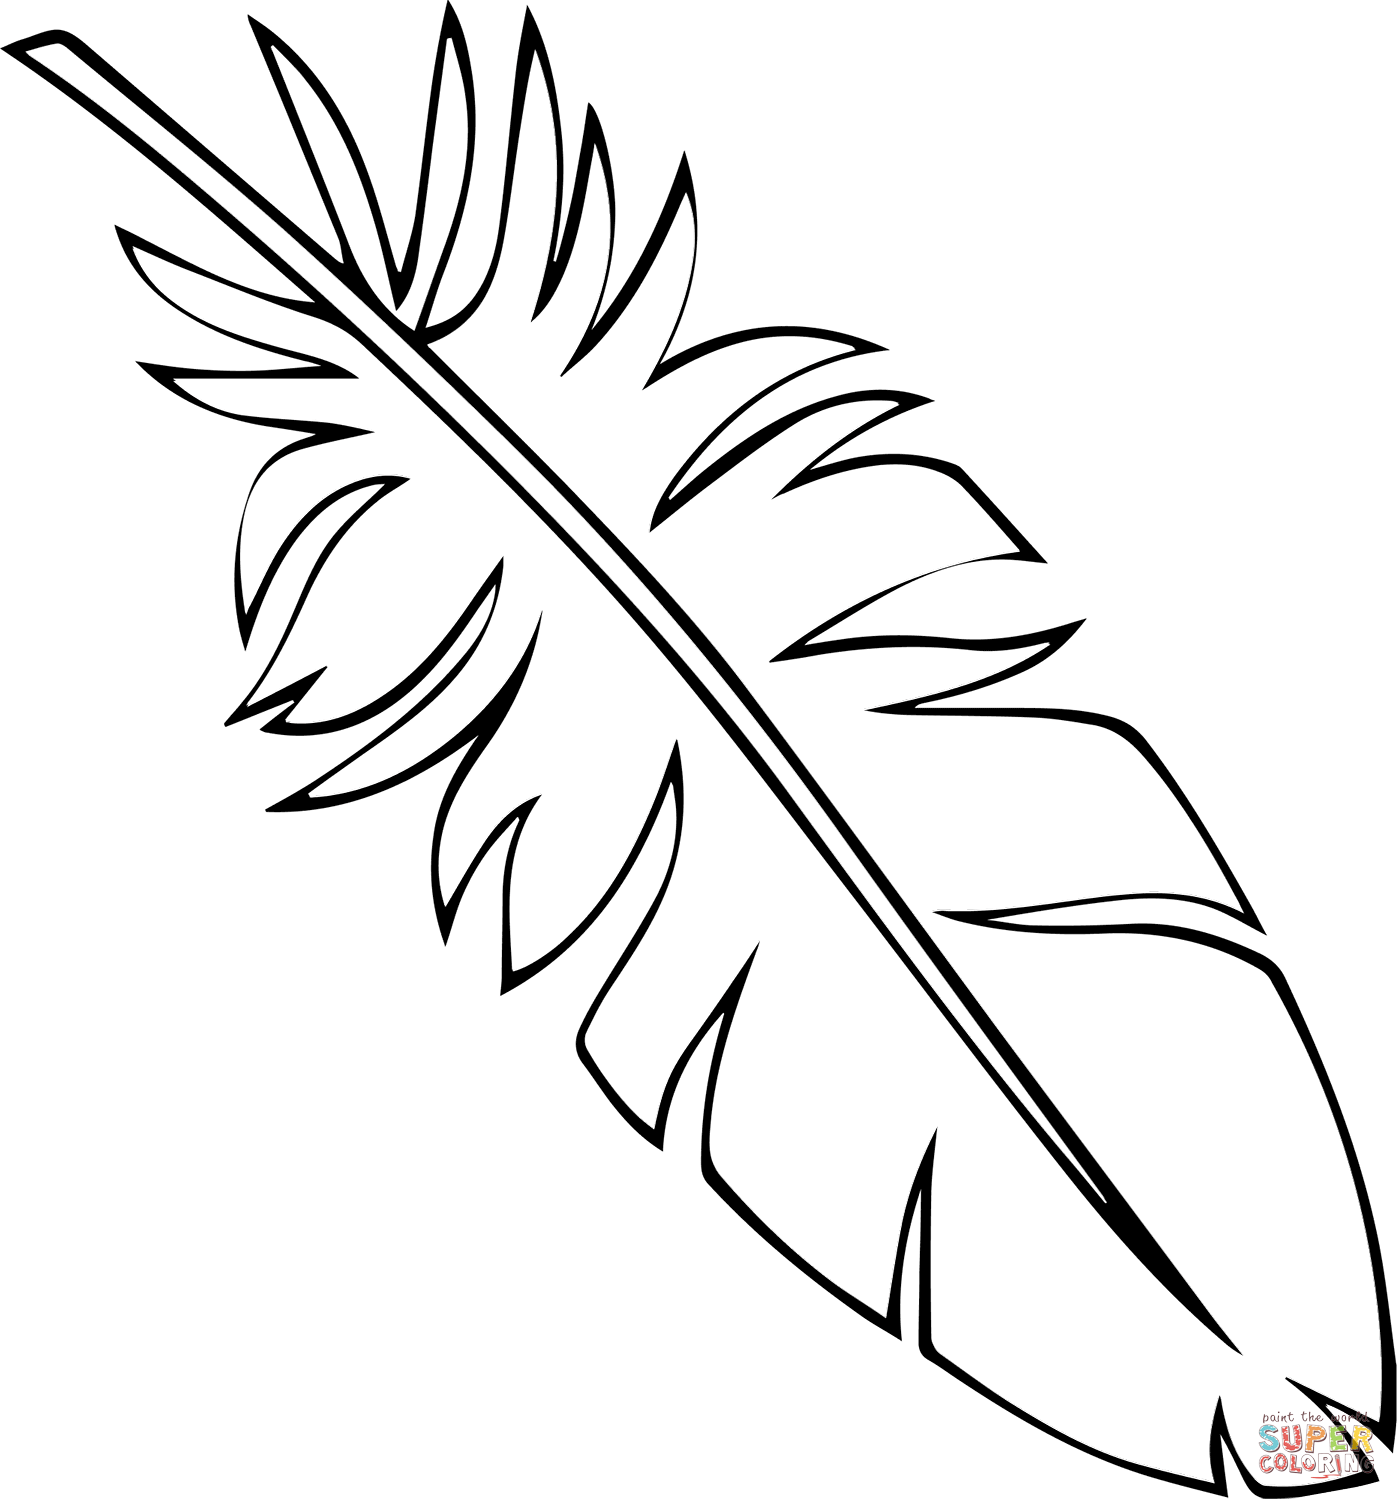 Feather coloring page free printable coloring pages